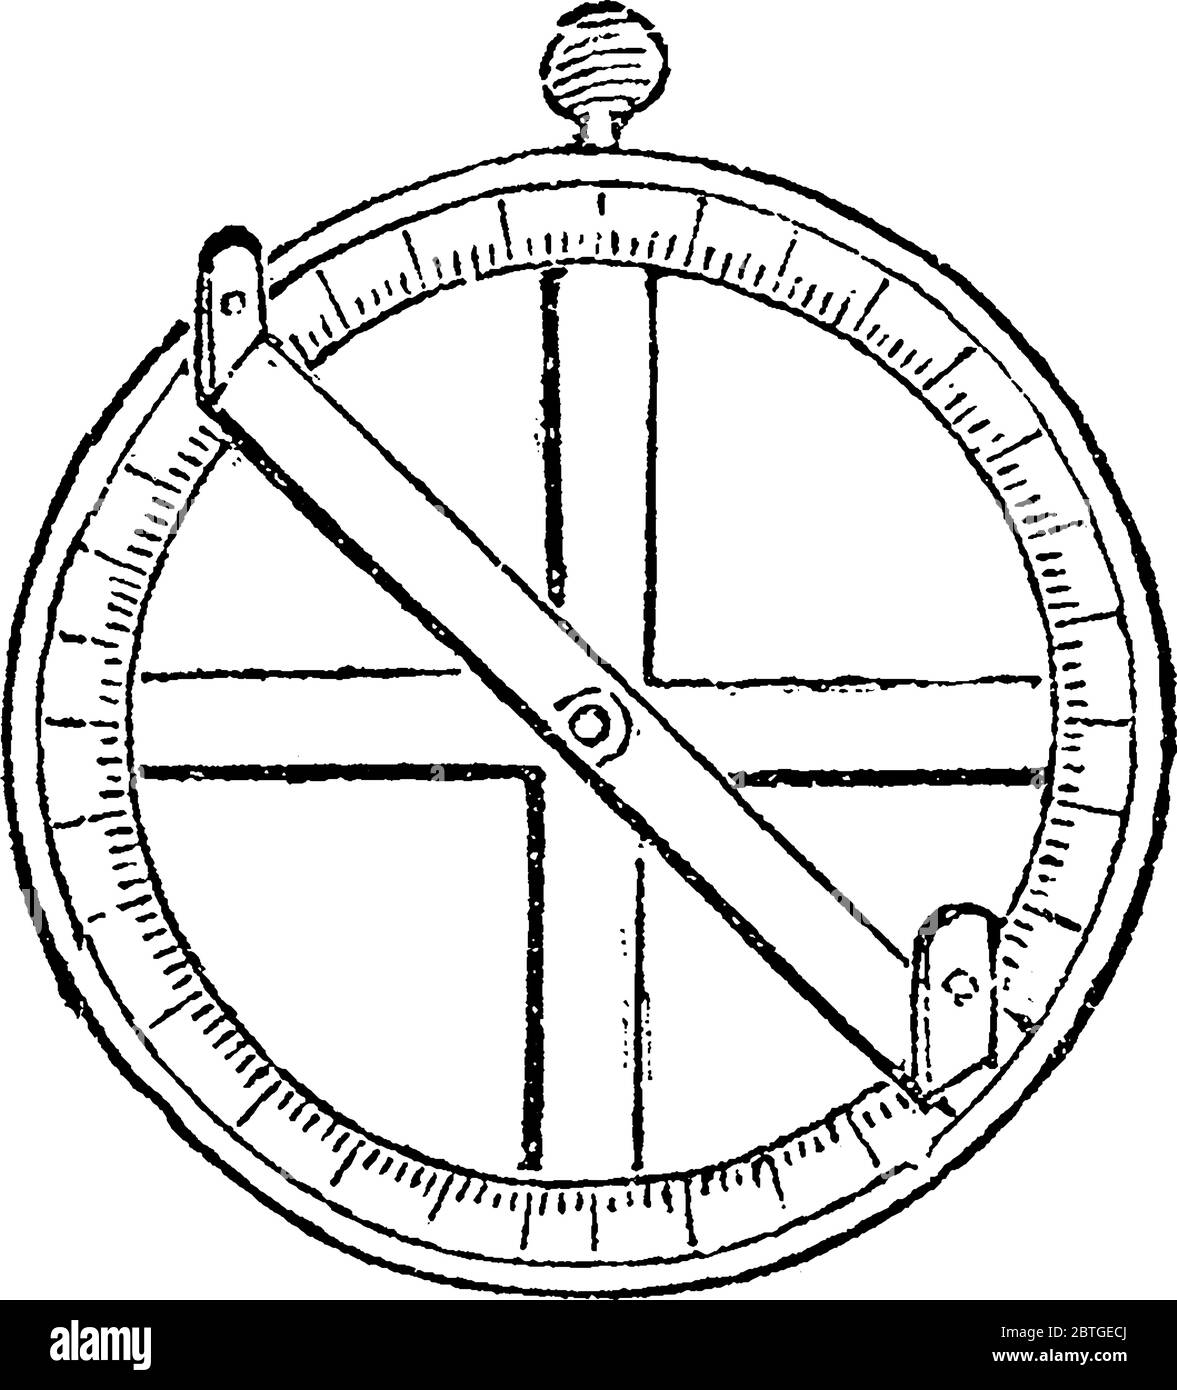 An astrolabe is an elaborate inclinometer, historically used by astronomers and navigators to measure the altitude above the horizon of a celestial bo Stock Vector